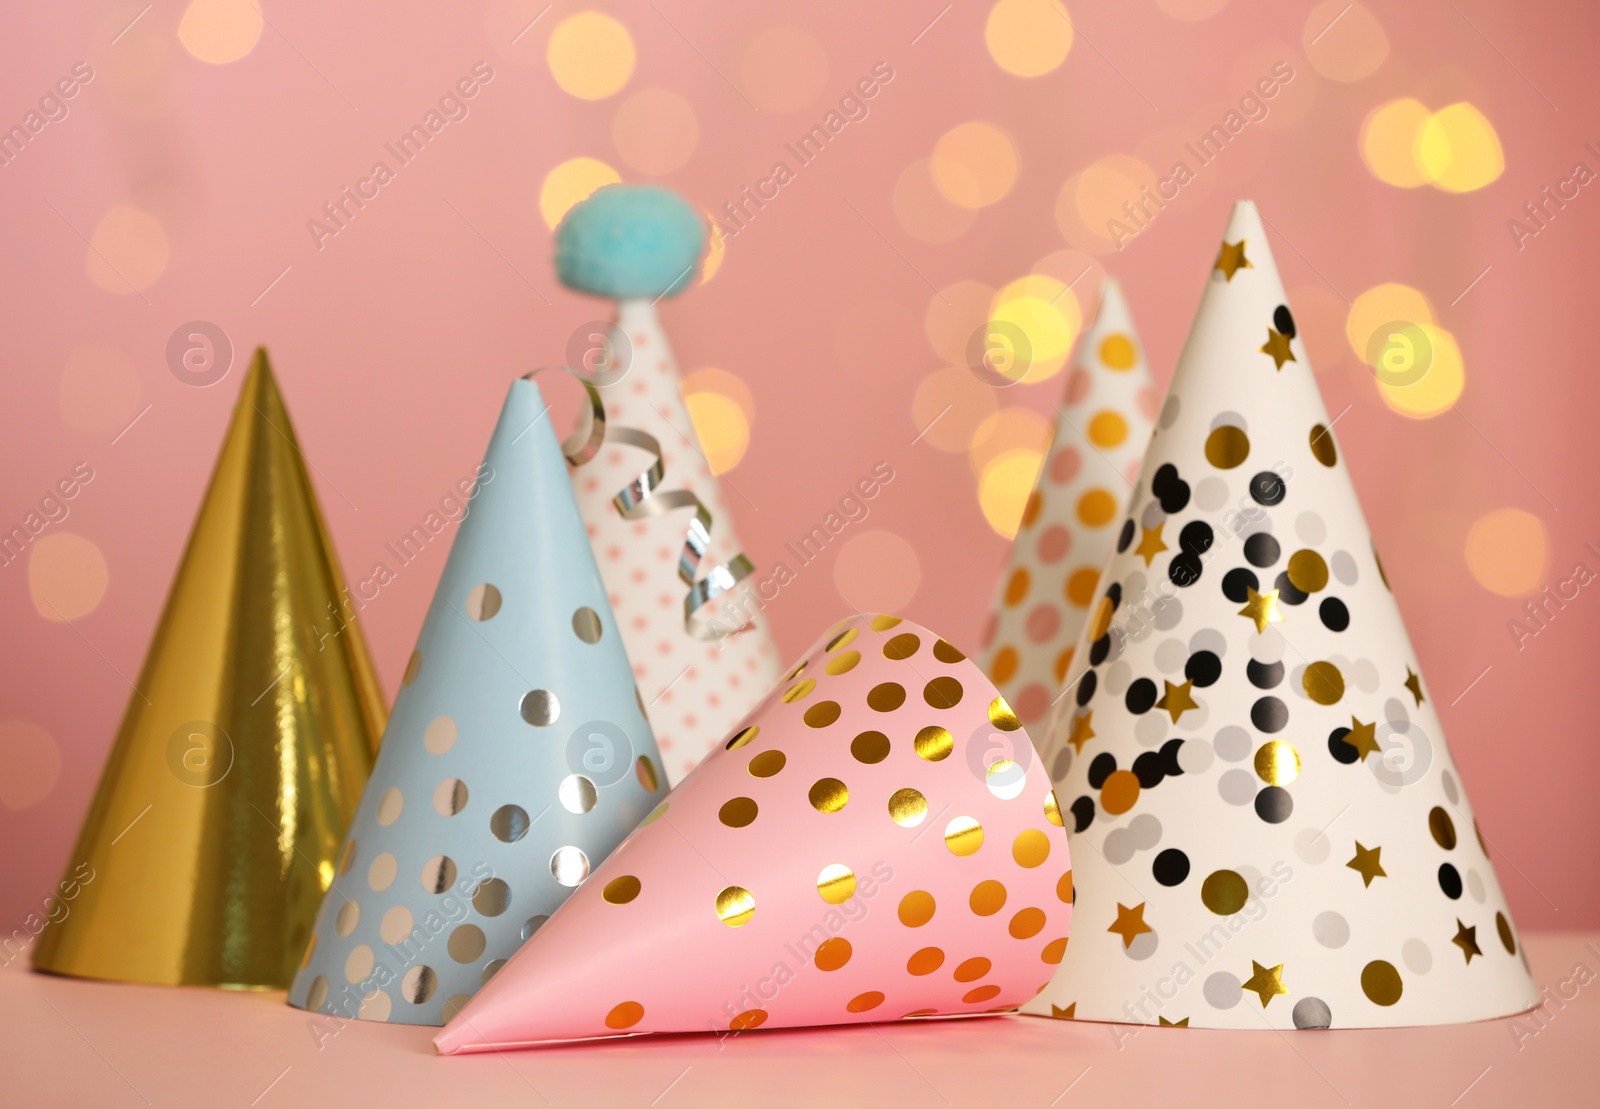 Photo of Beautiful party hats on pink table against blurred festive lights